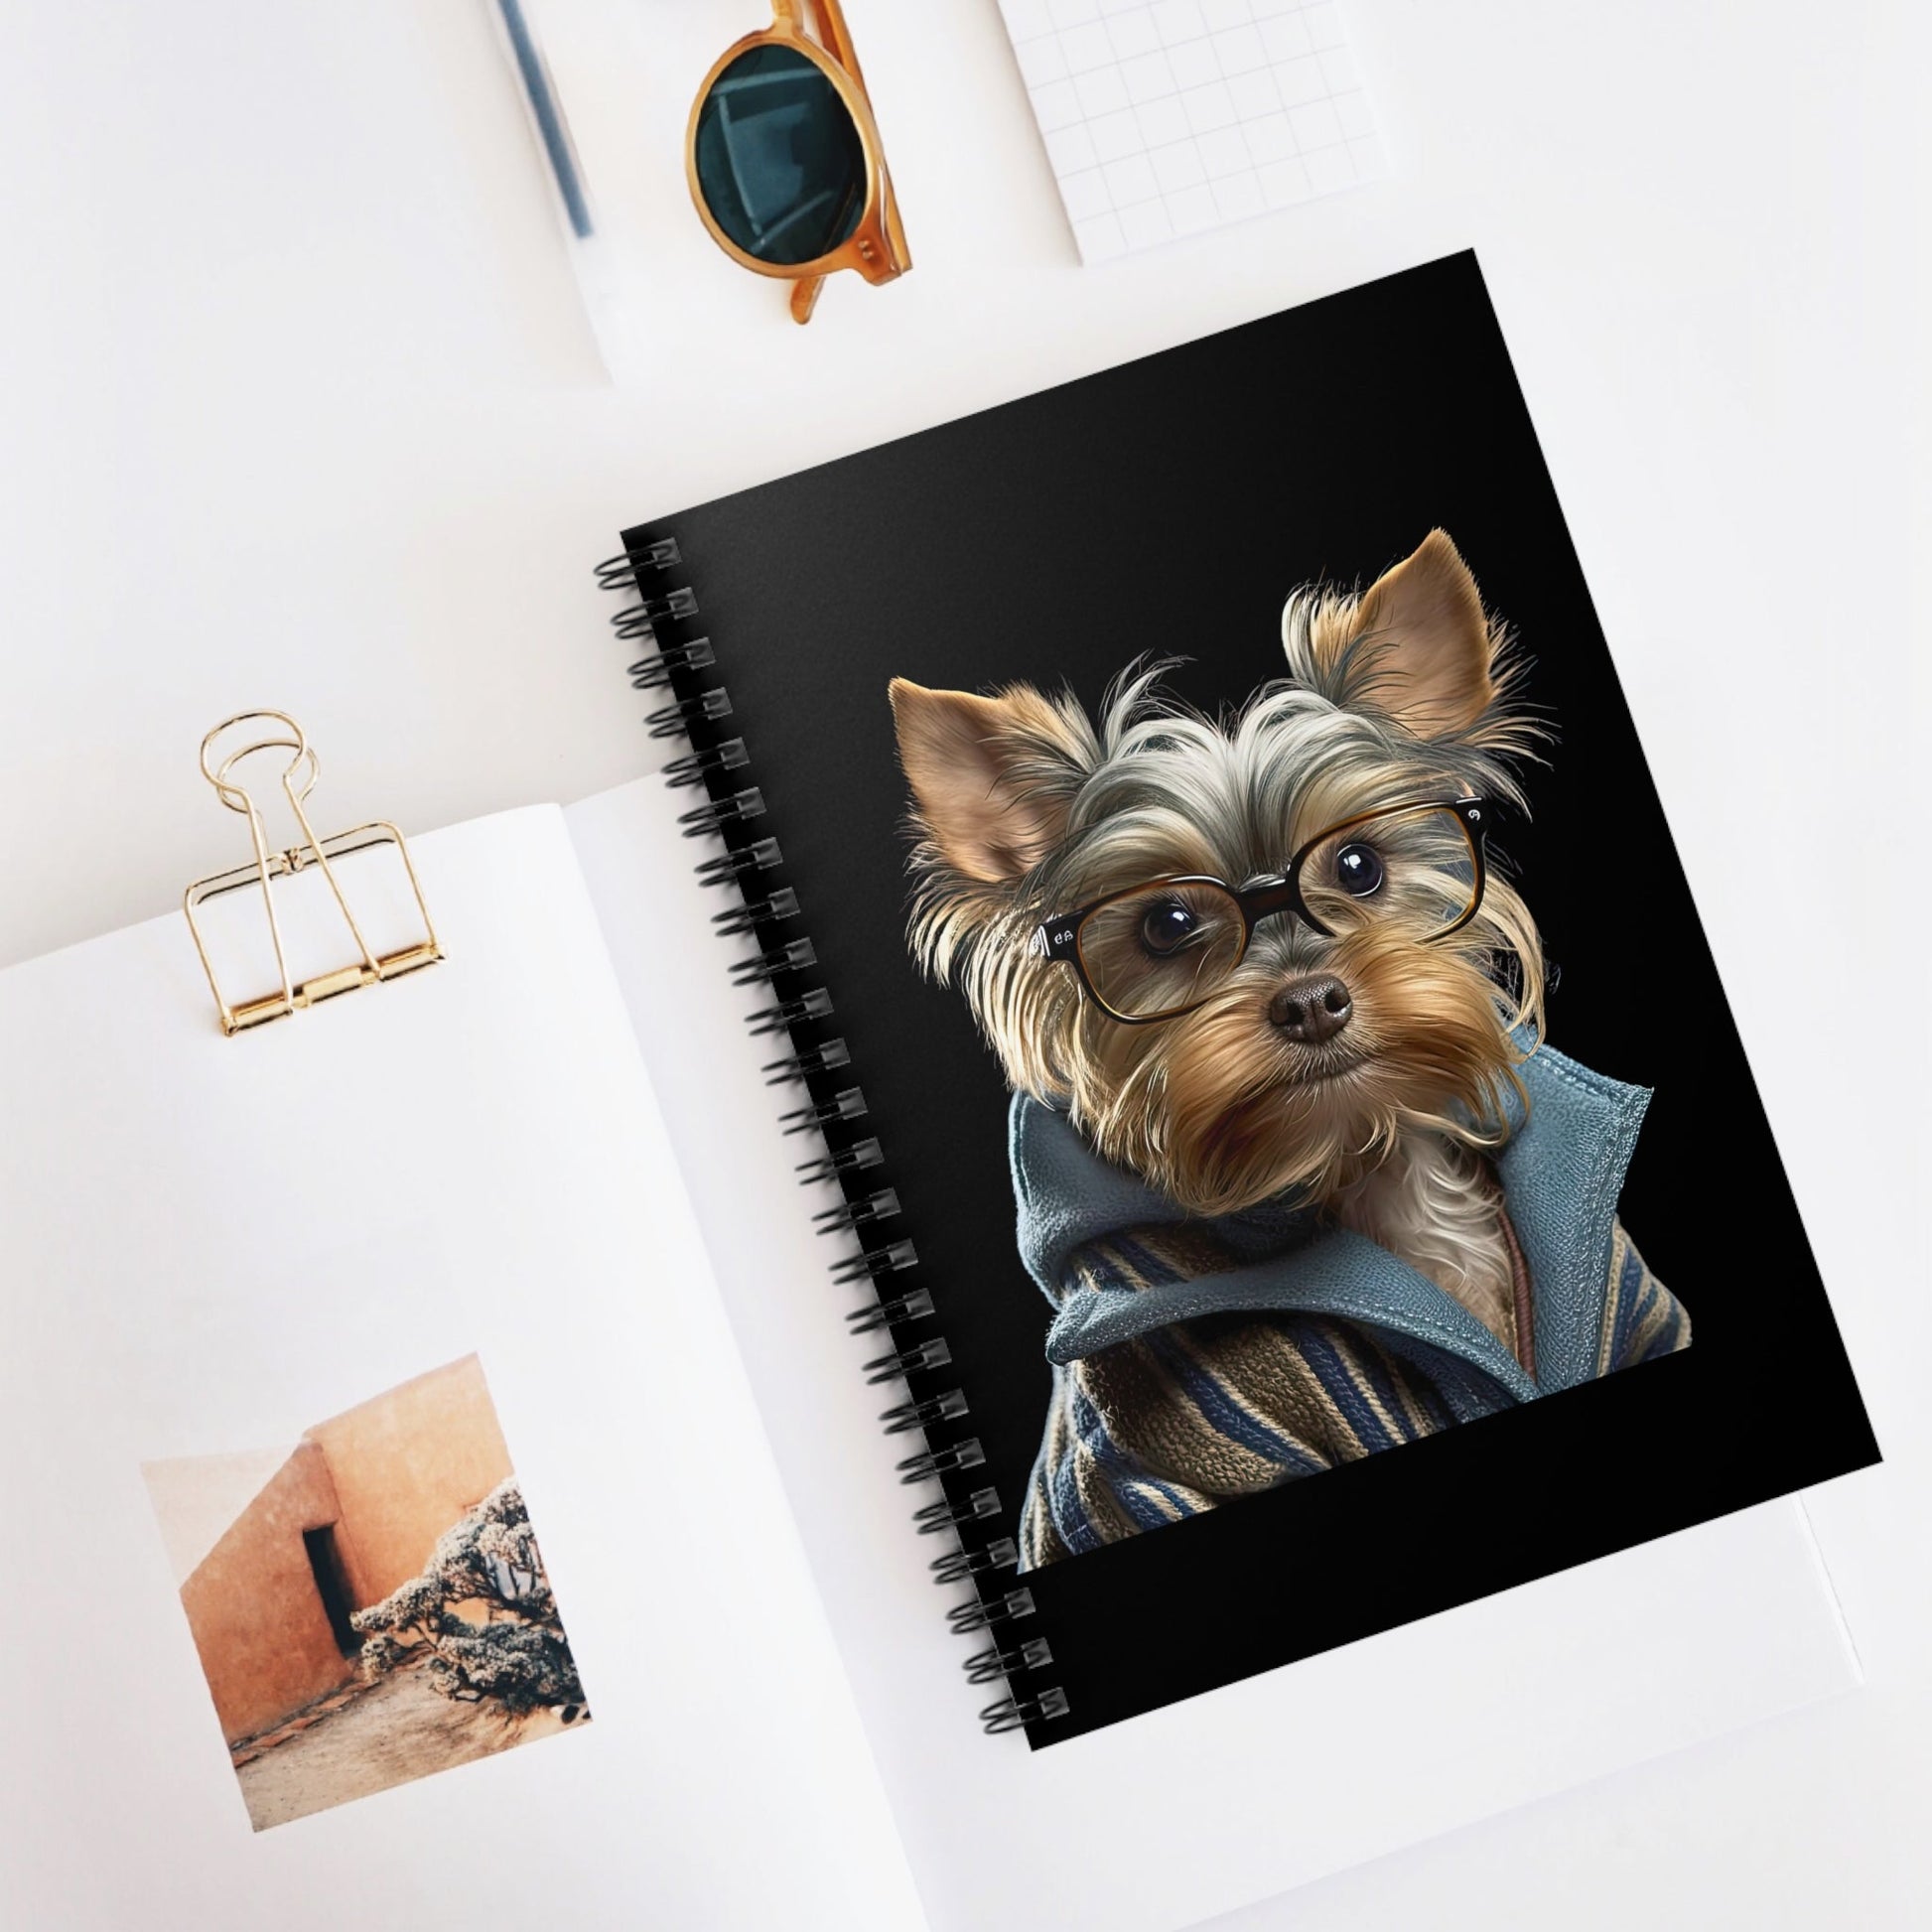 YETTIE : Spiral Notebook - Ruled Line - Shaggy Chic